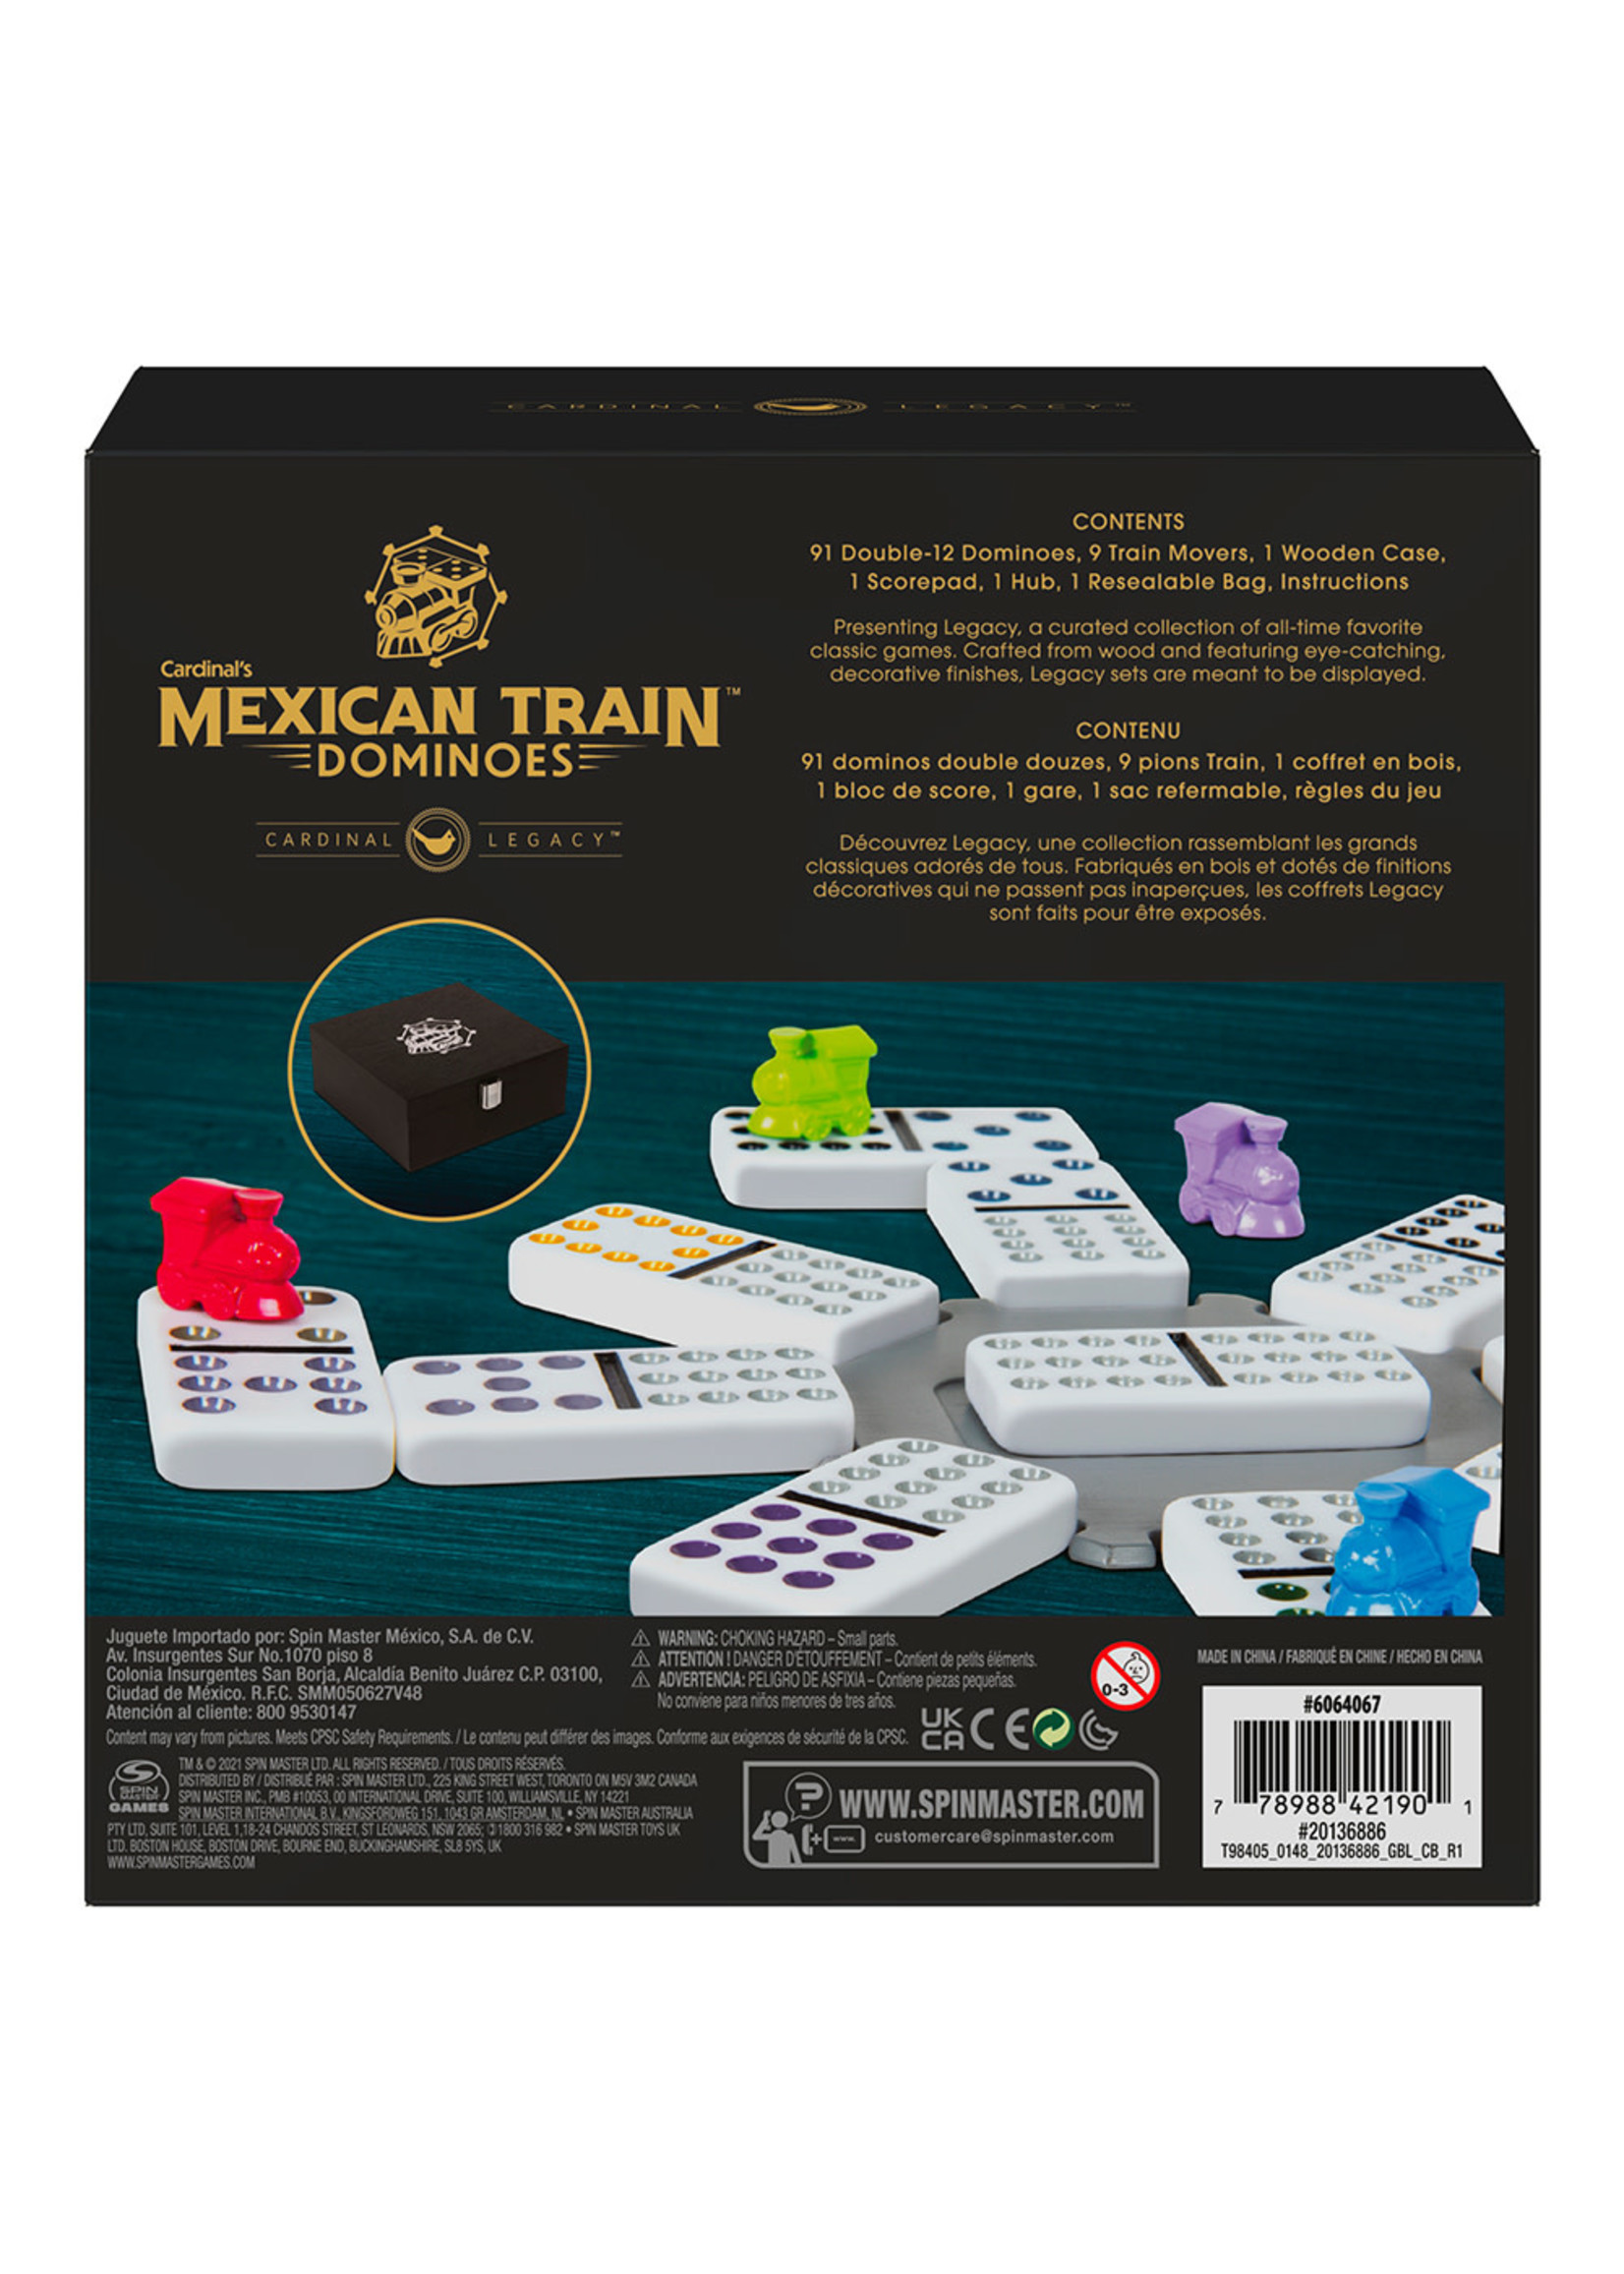 Spin Master Deluxe Mexican train Dominoes